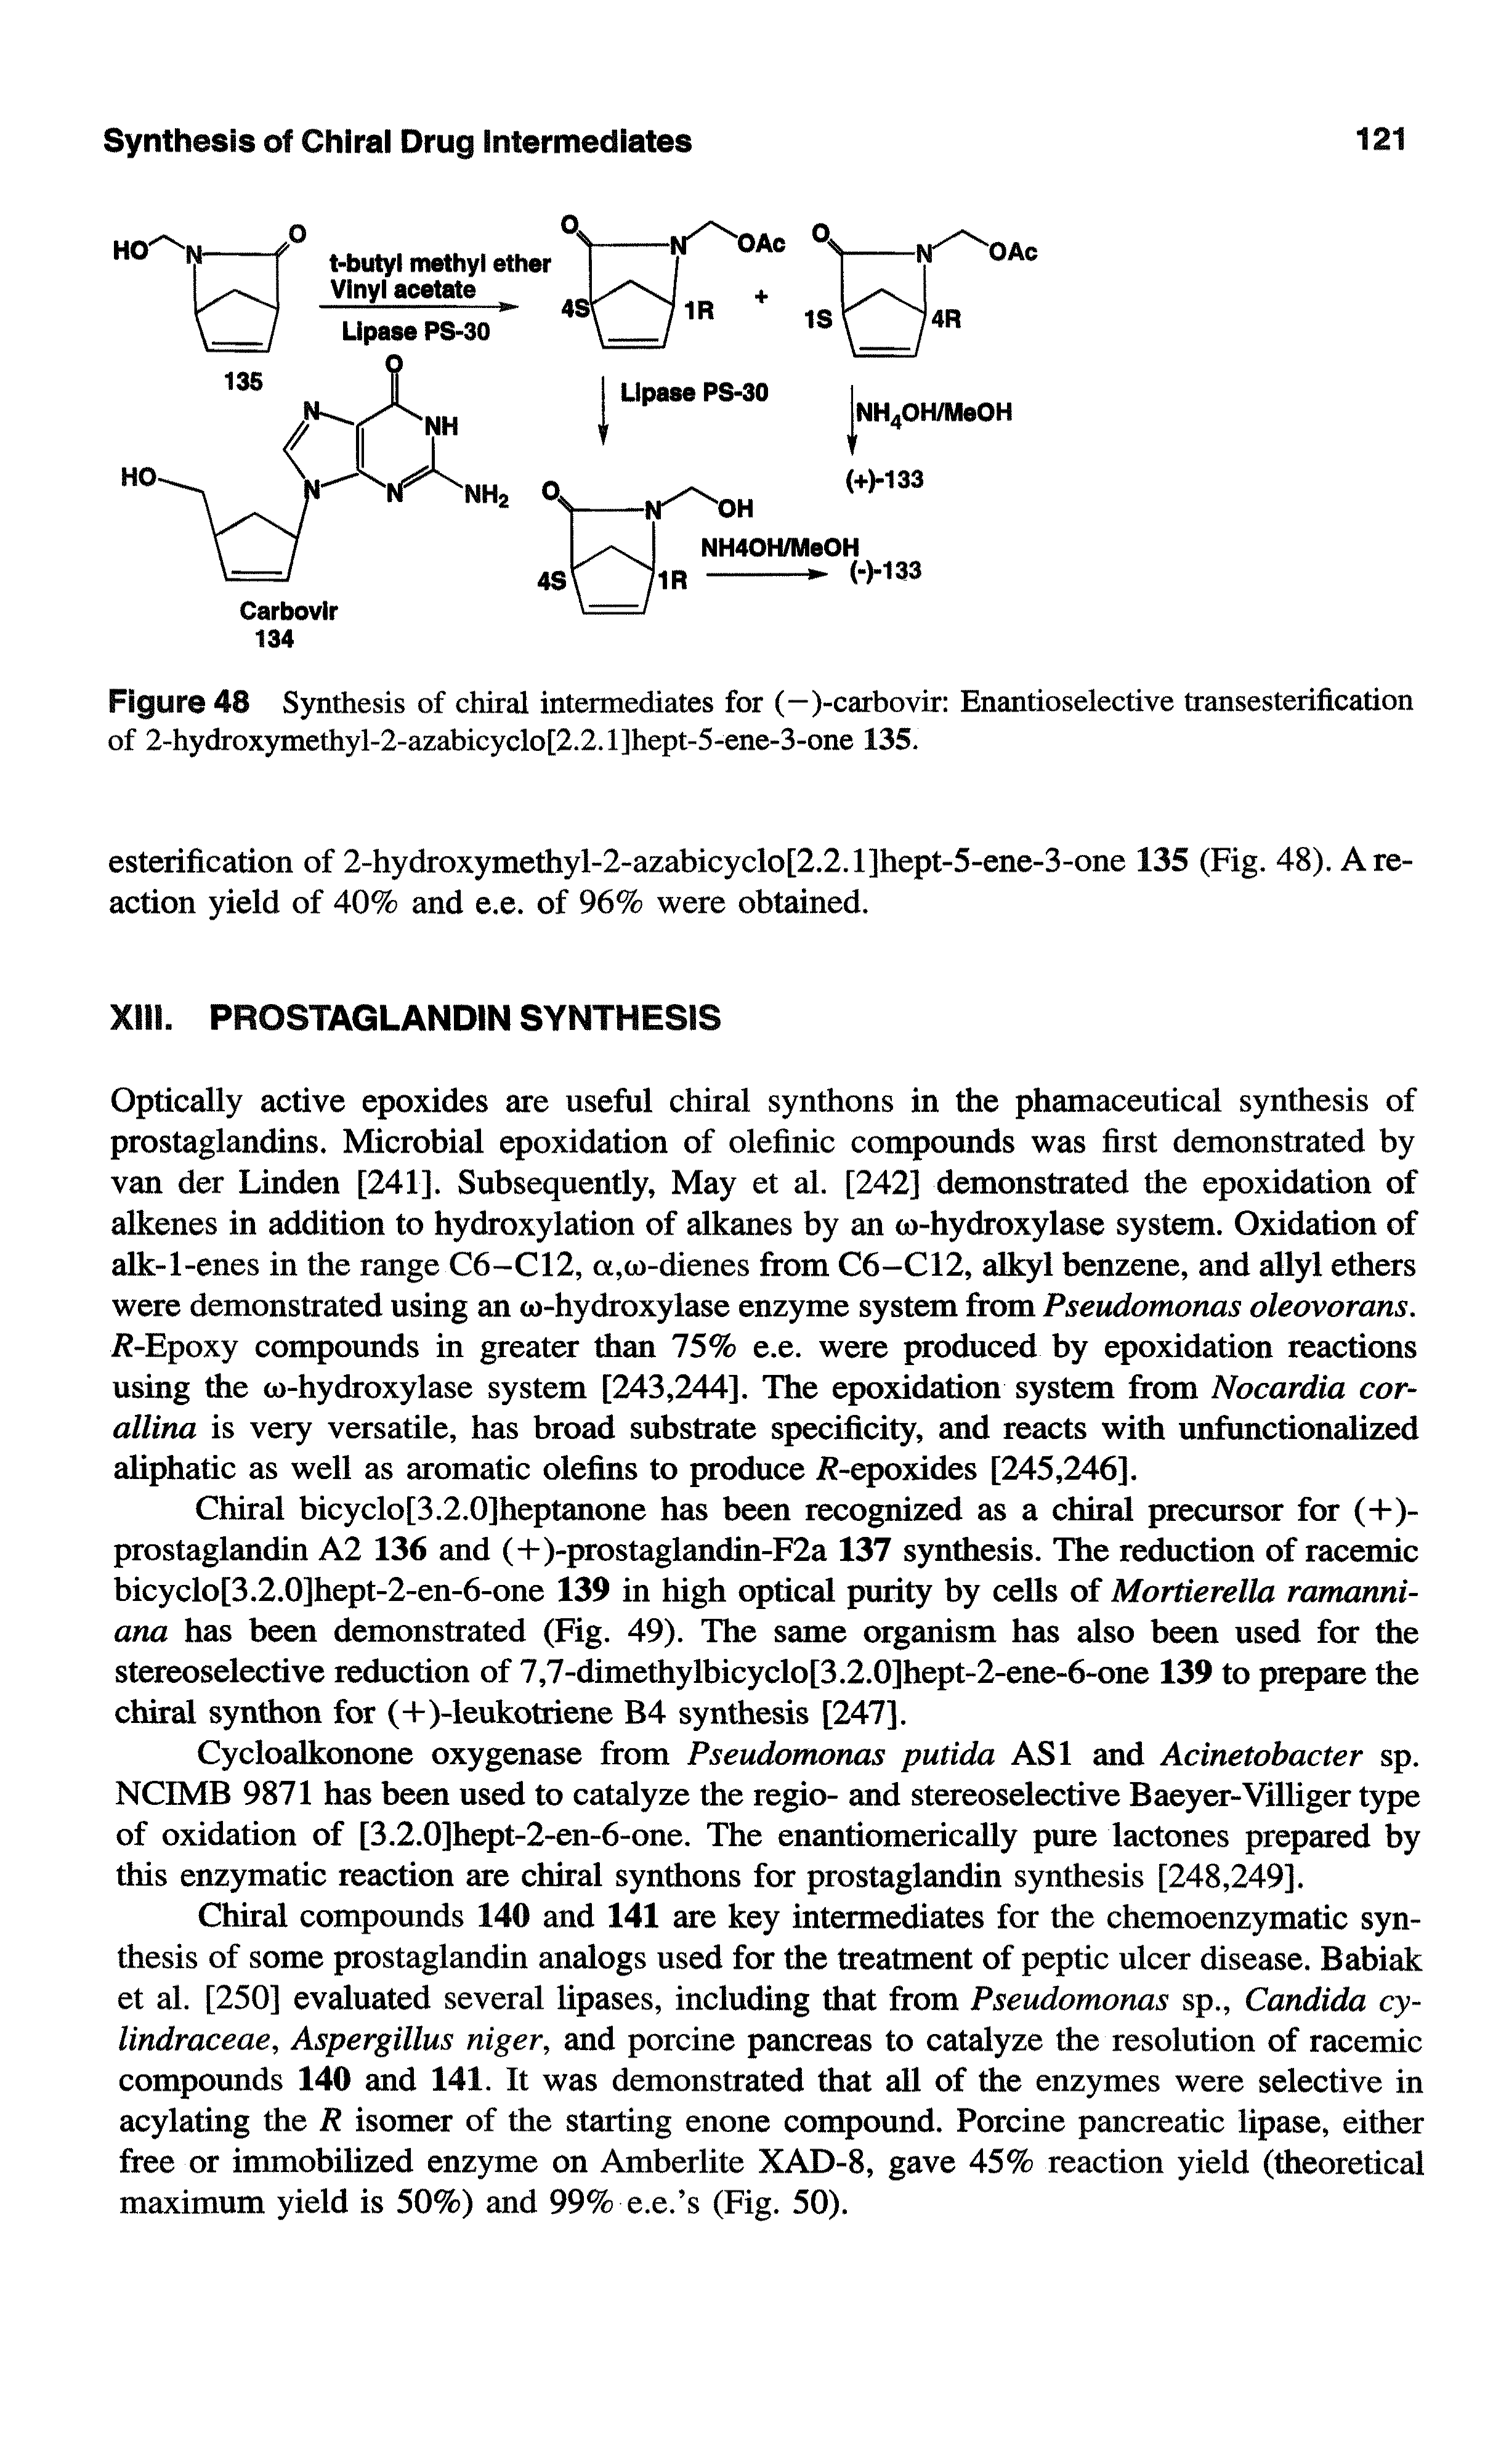 Figure 48 Synthesis of chiral intermediates for (-)-carbovir Enantioselective transesterification of 2-hydroxymethyl-2-azabicyclo[2.2.1]hept-5-ene-3-one 135.